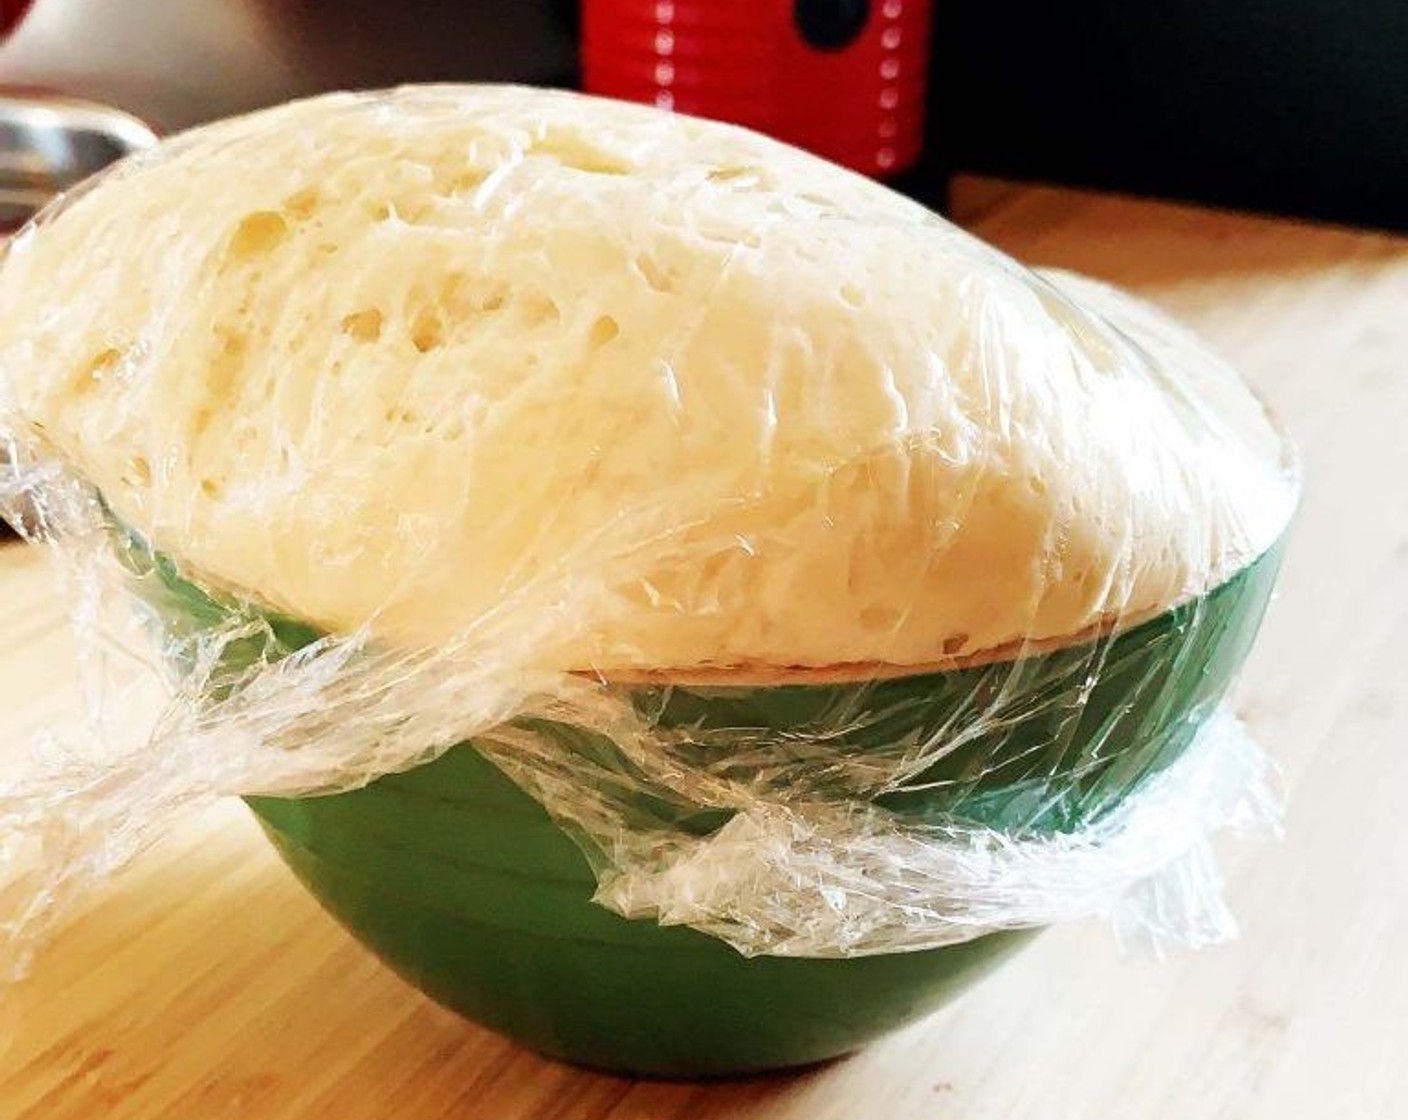 step 4 Place the dough into a bowl, cover with plastic wrap and place it in your oven while turned off. Let it rise for 3 hours.